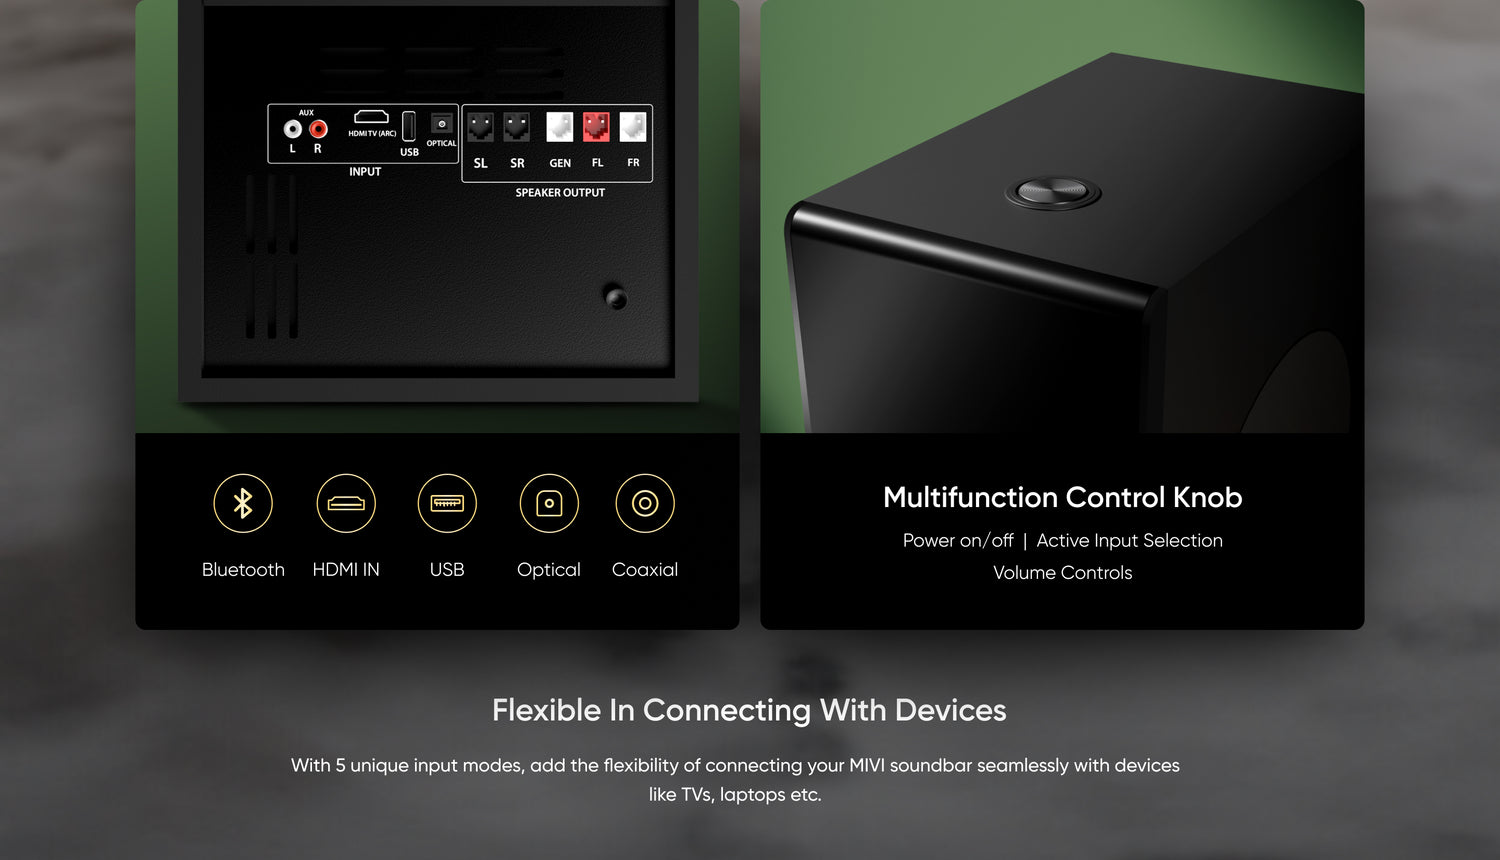 Bluetooth , HDMI IN, USB, Optical, Coaxial, Multifunction control knob, Power on/off  |  Active Input Selection Volume Controls, Flexible in Connecting with Devices - With 5 unique input modes, add the flexibility of connecting your MIVI soundbar seamlessly with devices like TVs, laptops etc.